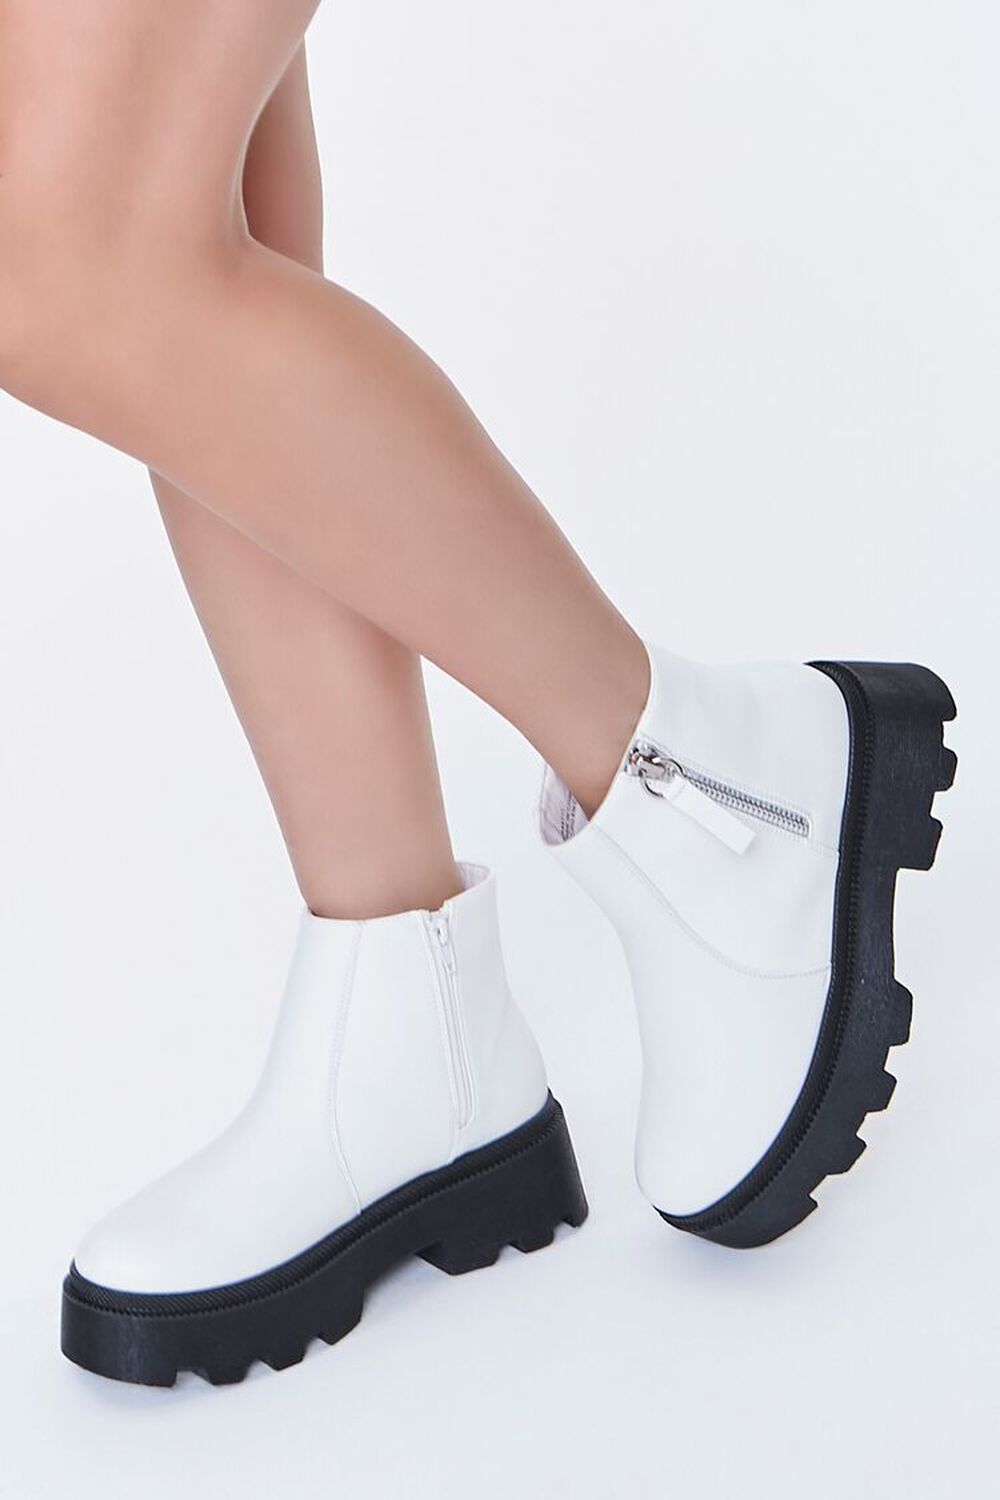 WHITE Faux Leather Lug Booties, image 1